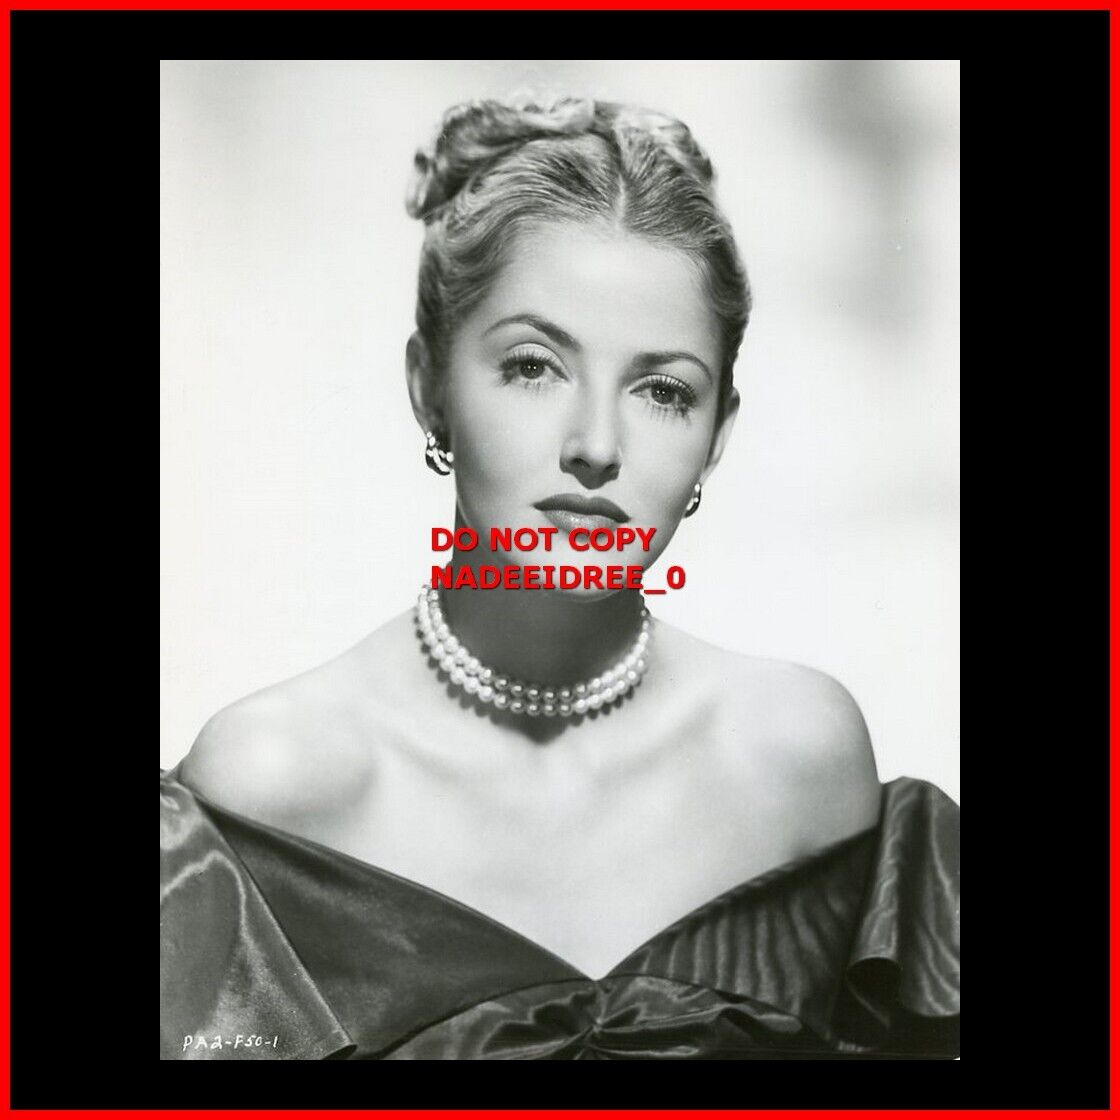 MARTHA VICKERS IN STUNNING PORTRAIT  1948  RUTHLESS 8X10 PHOTO